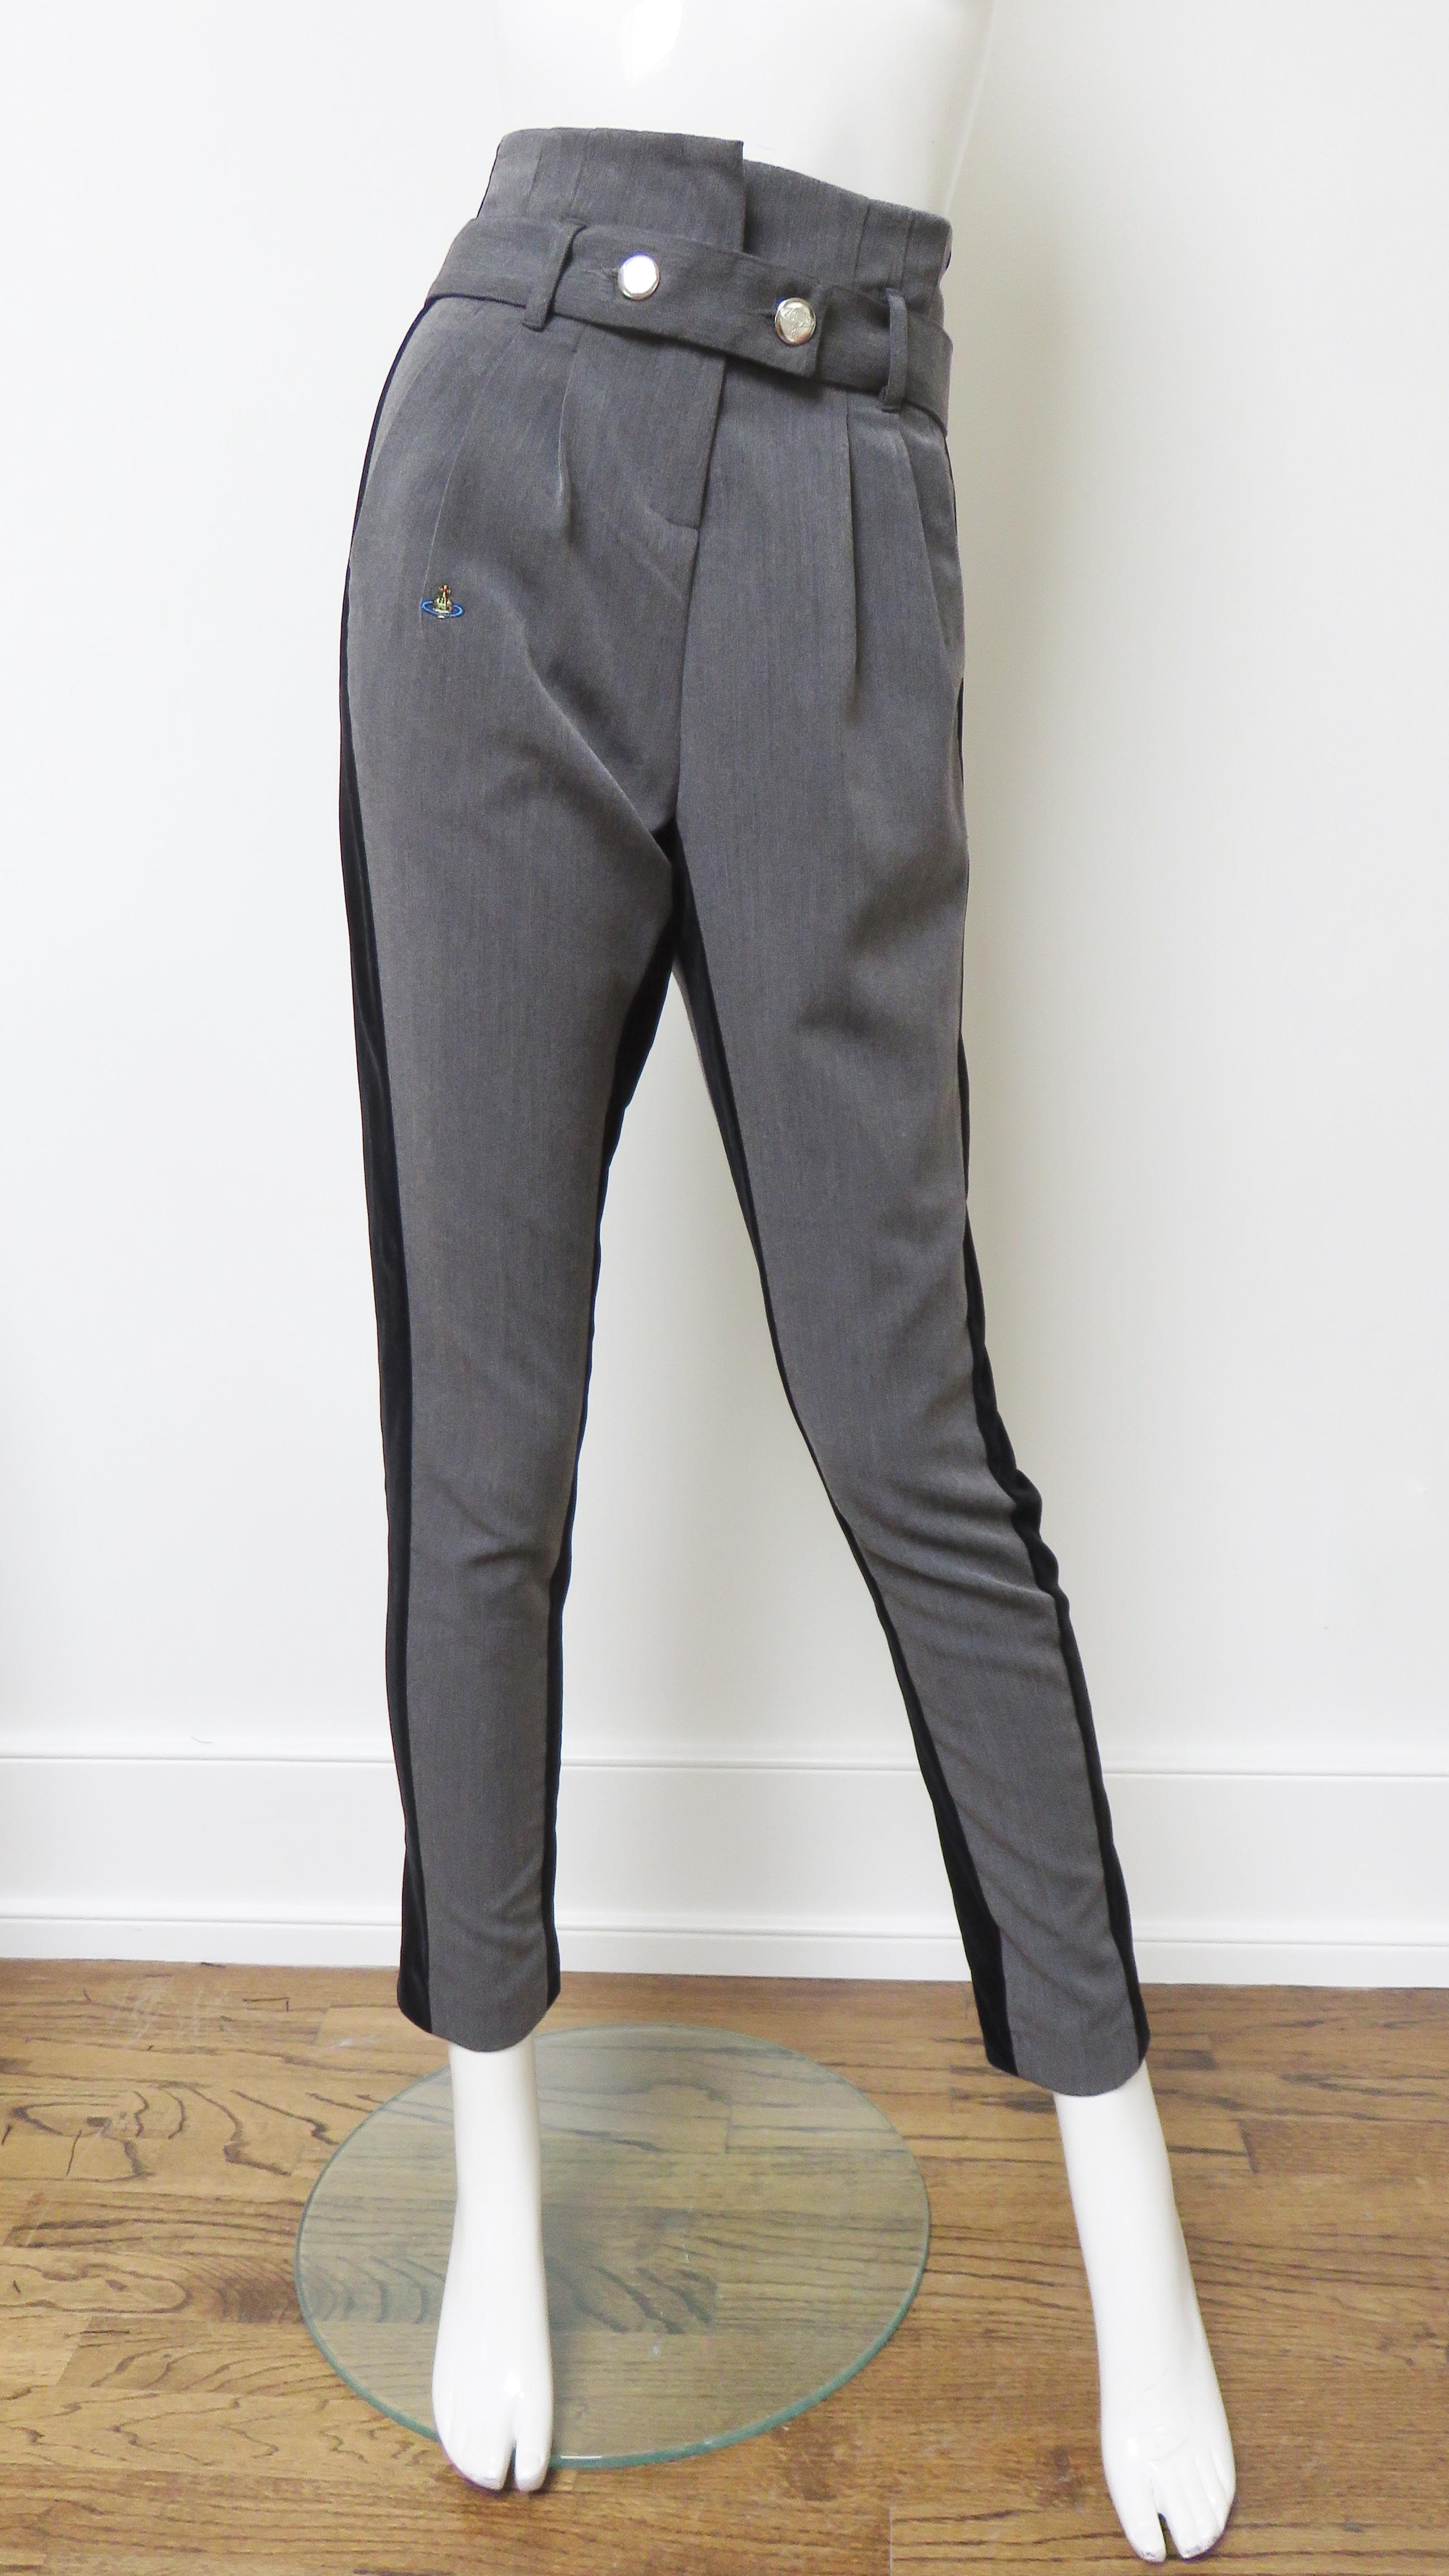 A fabulous pair of taupe grey wool and black pants by Vivienne Westwood. They are high waisted with front pleating, front pockets, a belt at the natural waistline closing with 2 silver orb inscribed signature metal buttons. The pant legs narrow to